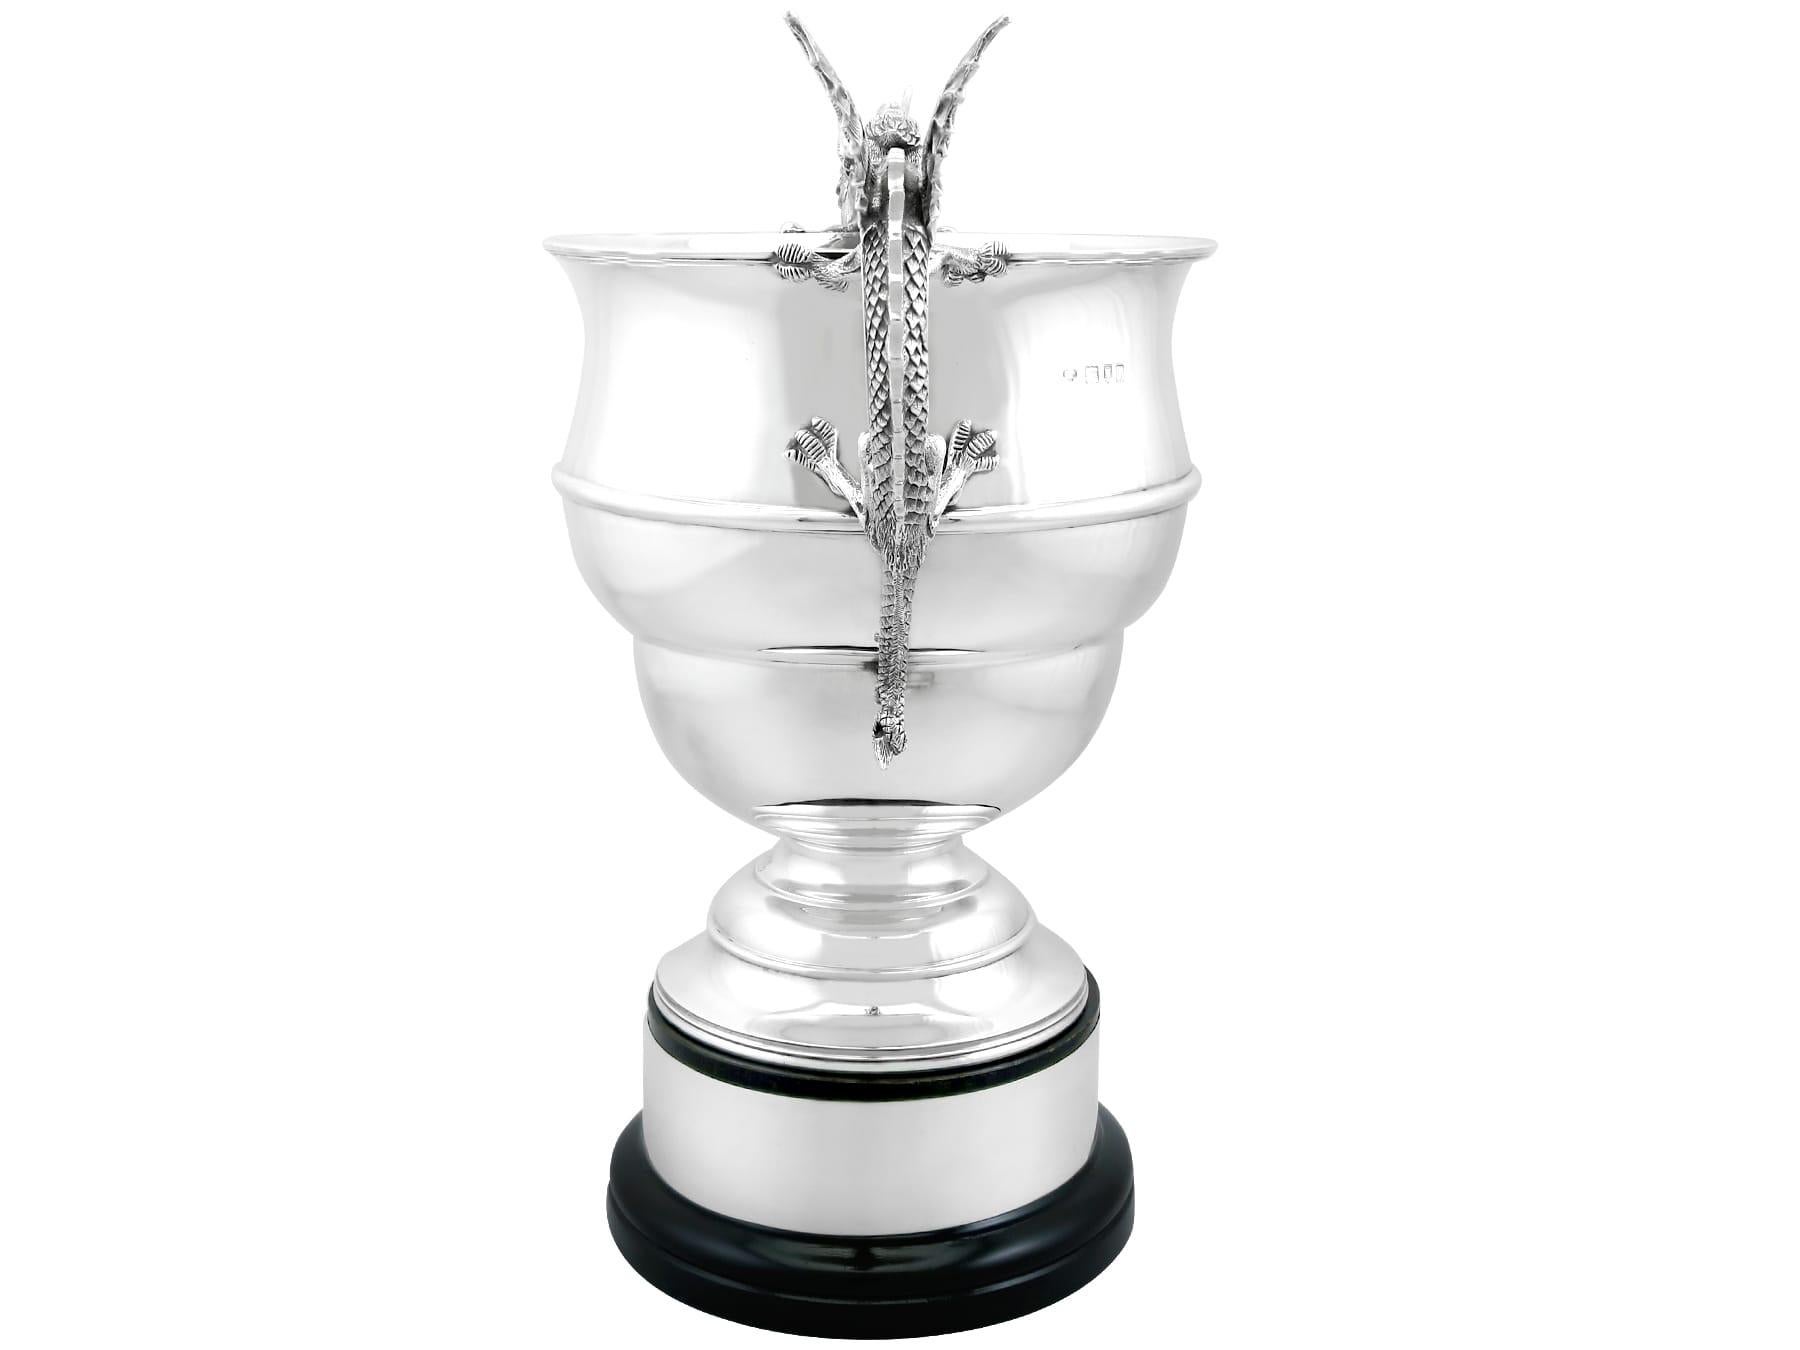 Antique Edwardian Sterling Silver Presentation Cup and Plinth (1906) In Excellent Condition For Sale In Jesmond, Newcastle Upon Tyne